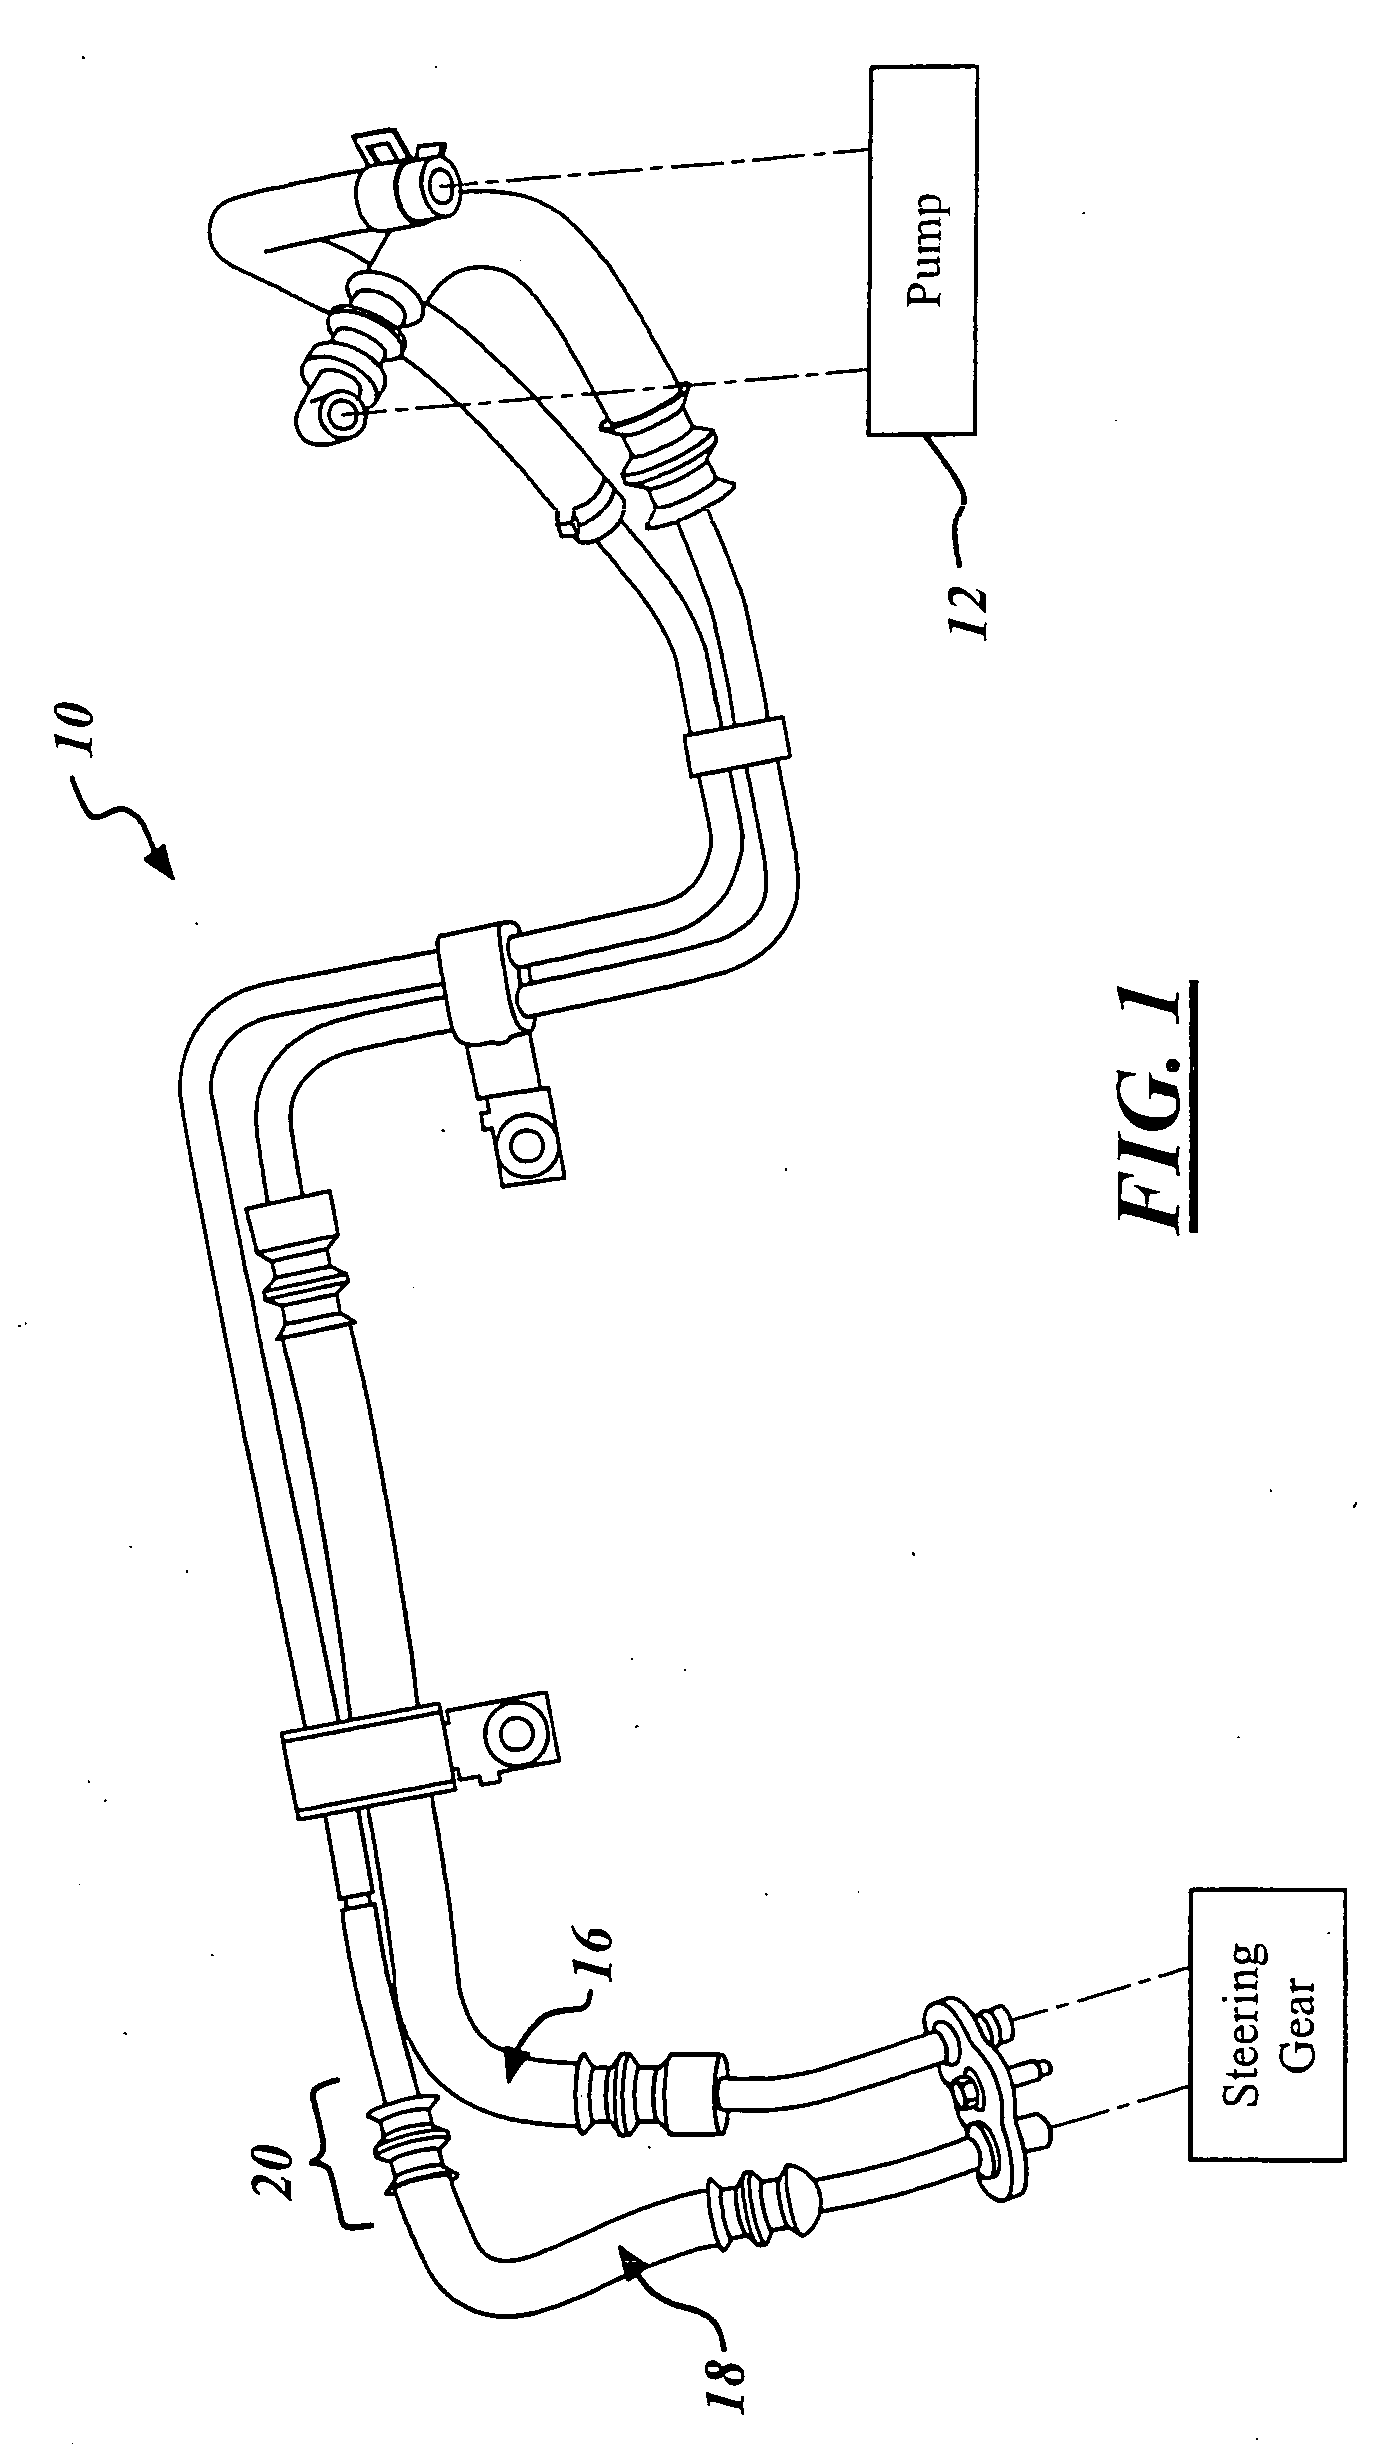 Tuning cable to pressure body connector